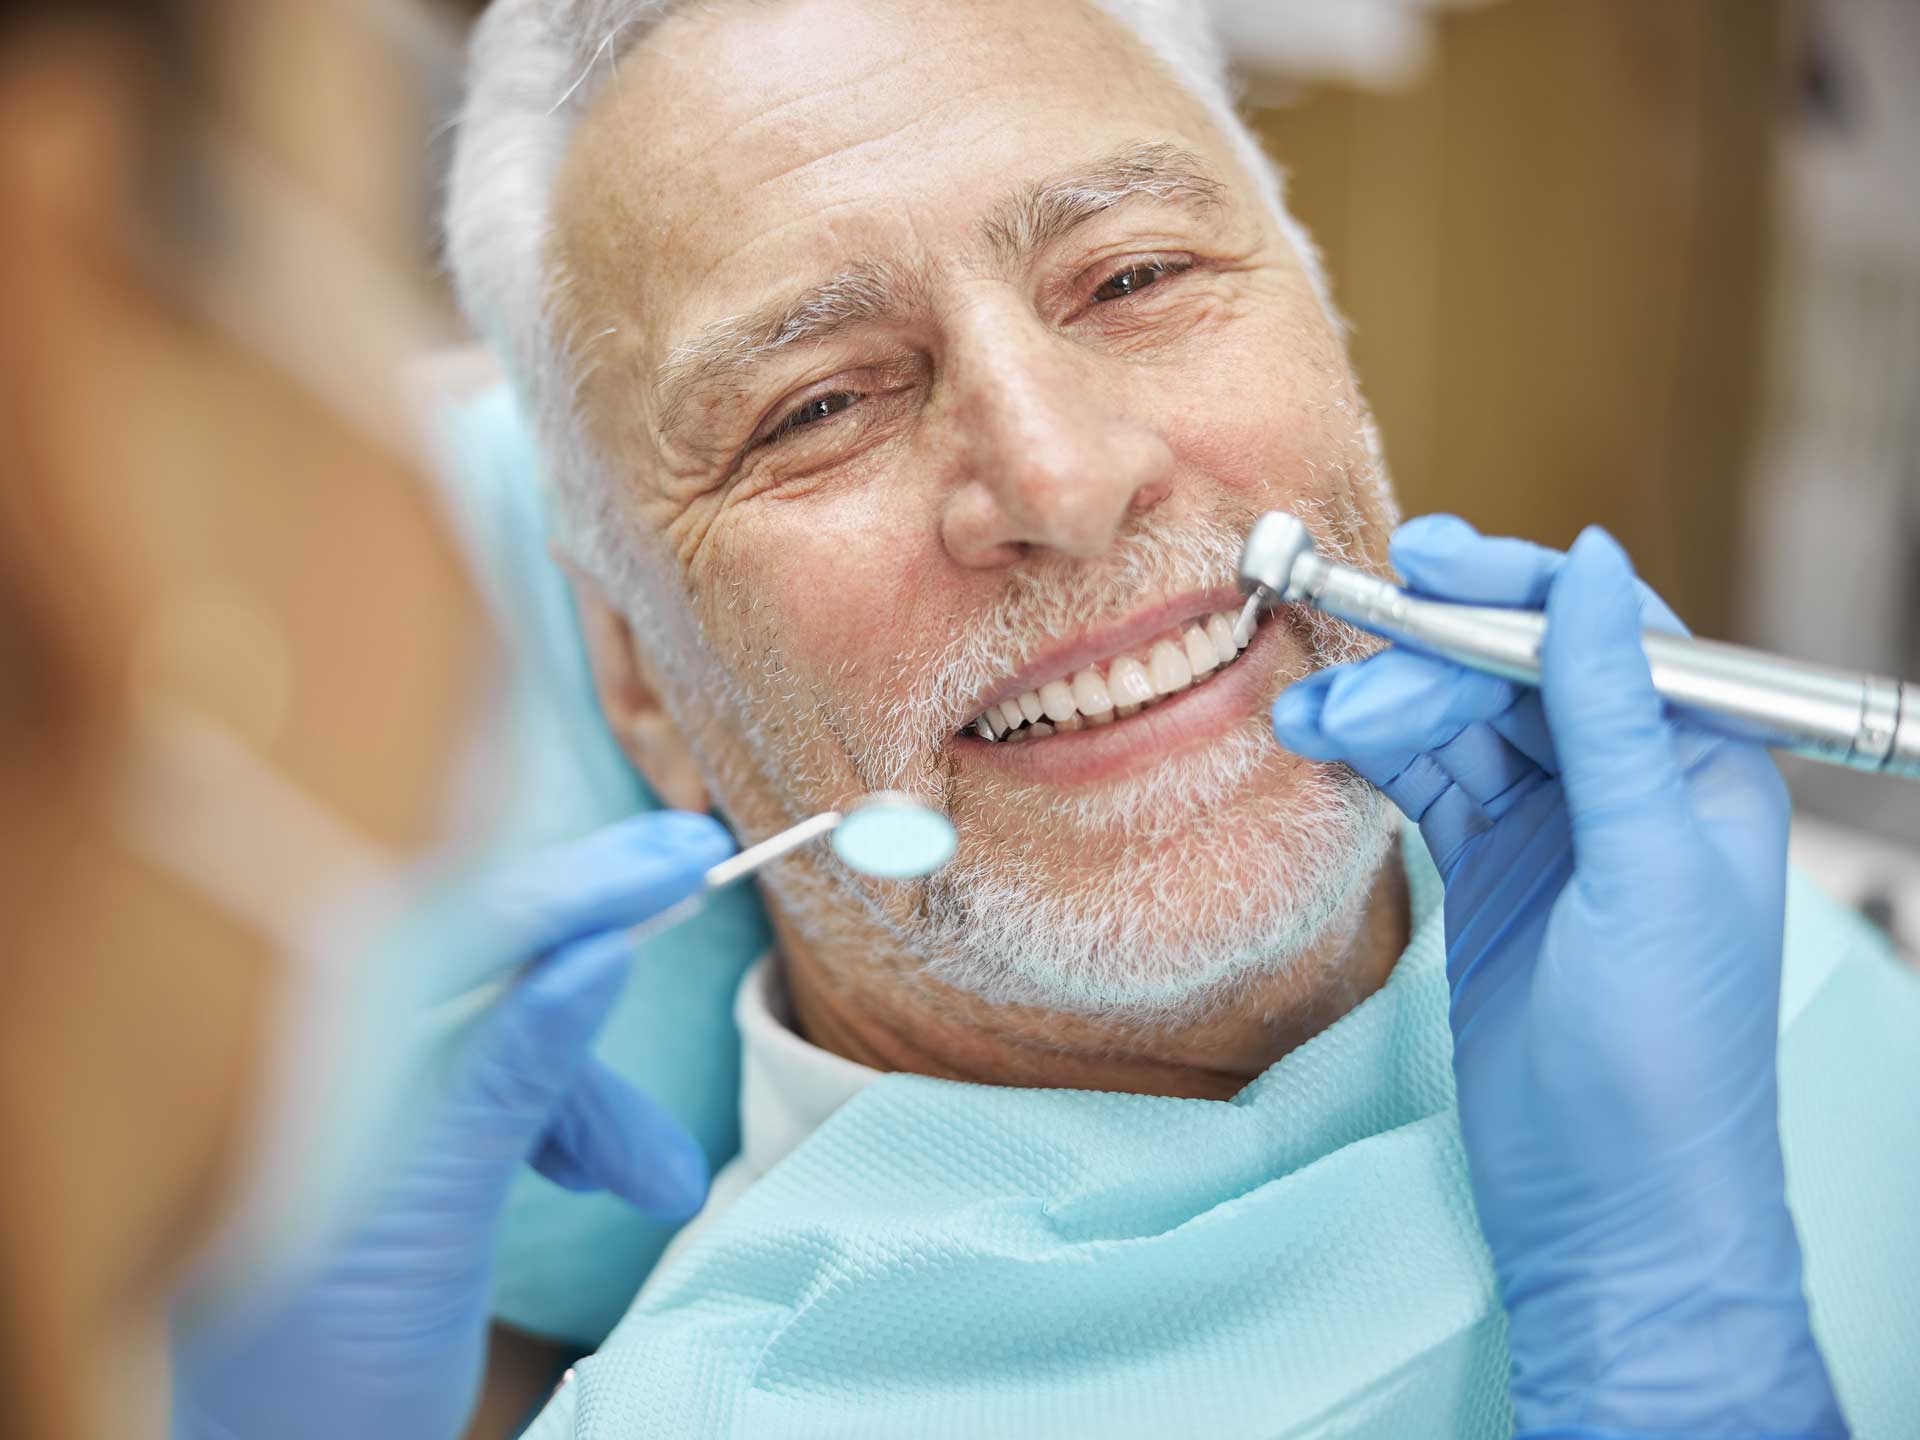 An elderly man is having his teeth examined by a dentist.